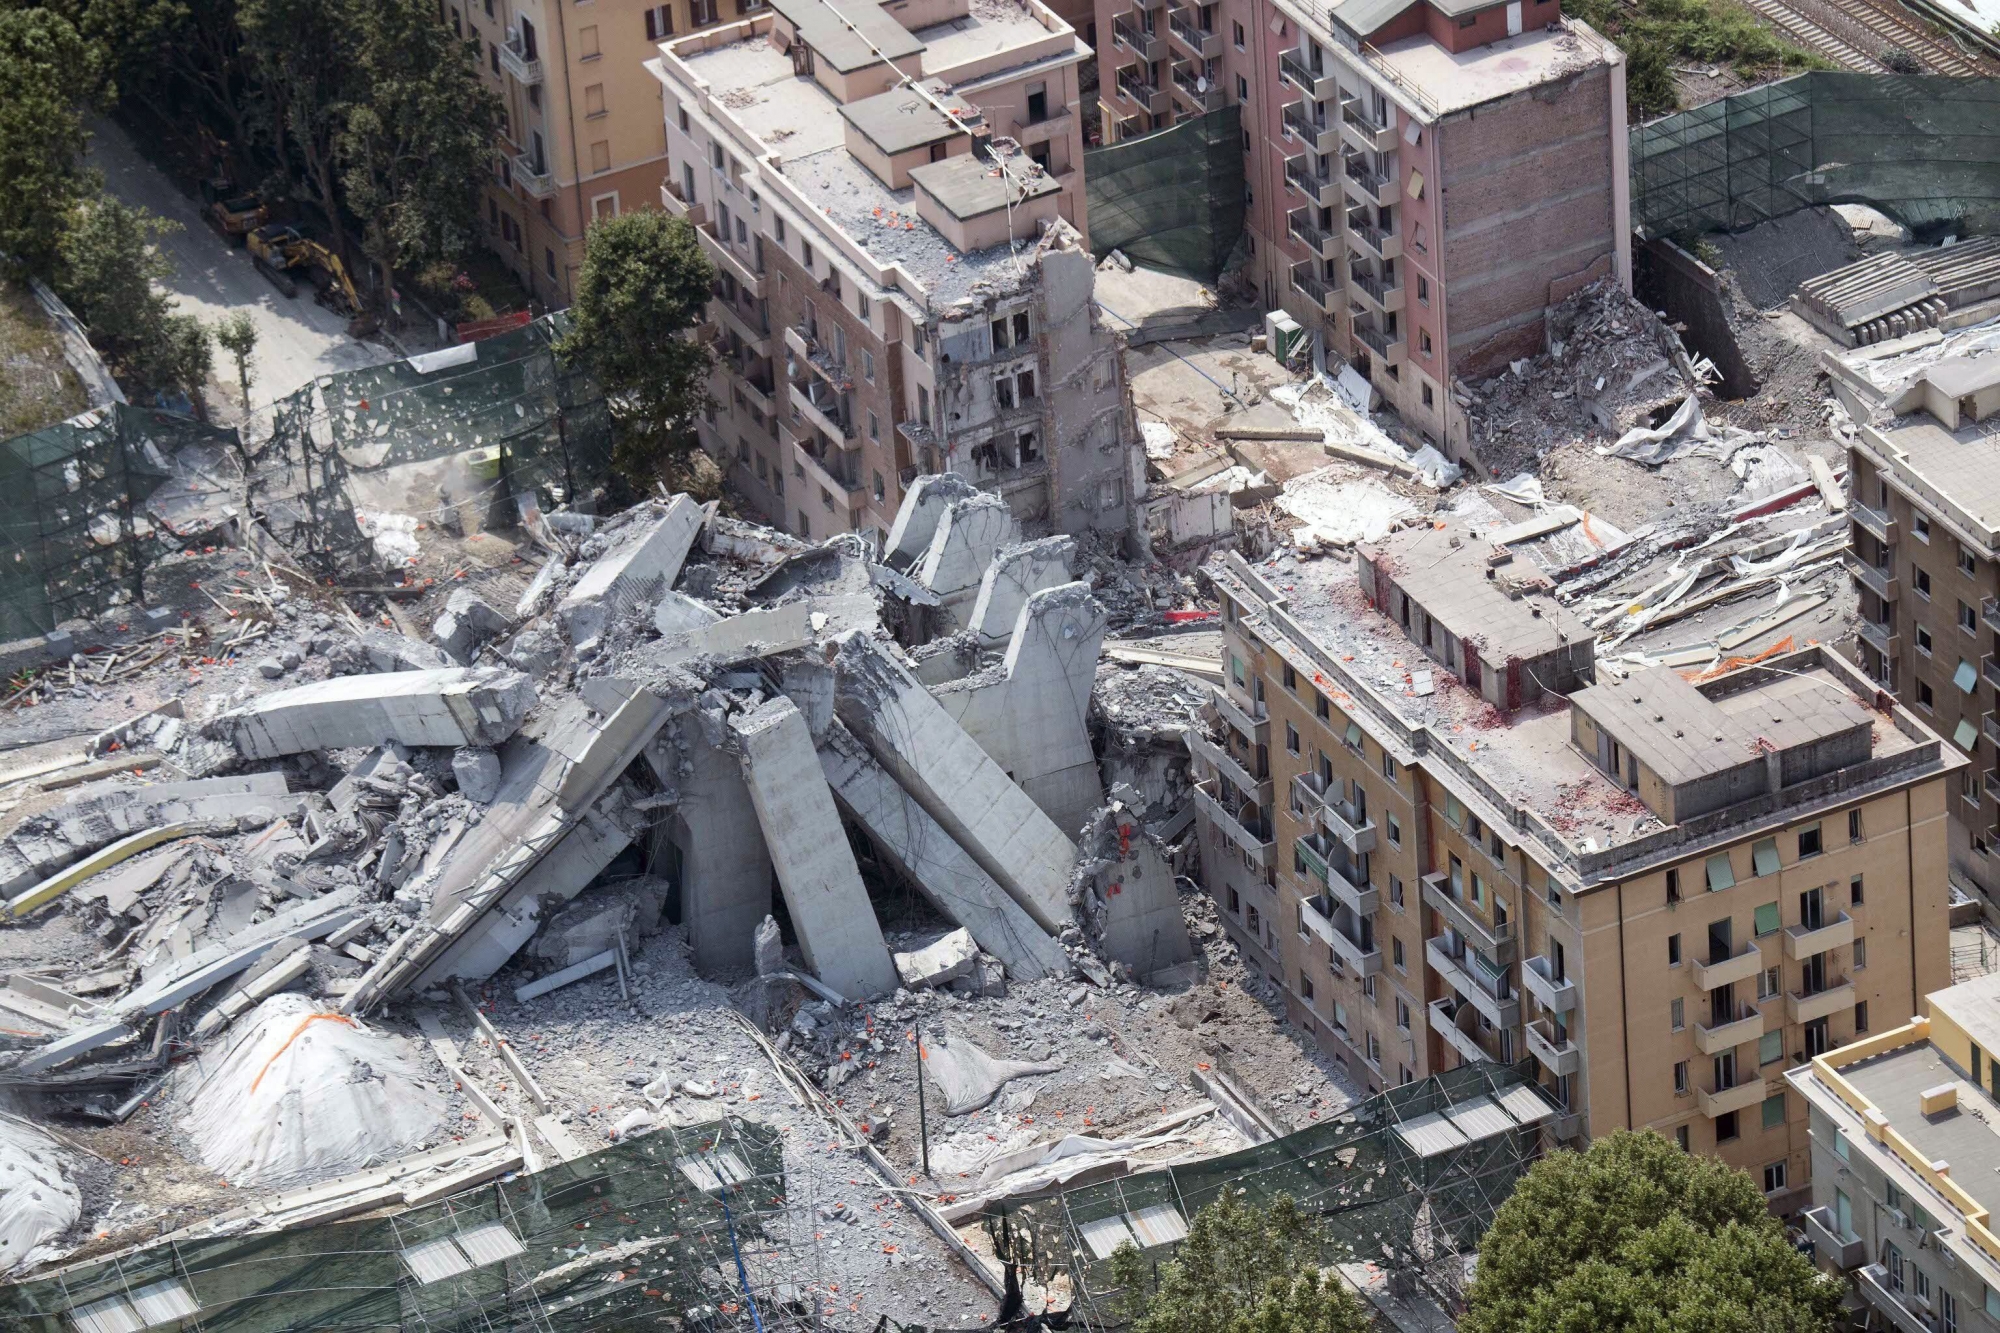 An aerial view of the remains of the Morandi bridge in Genoa, Italy, Saturday, June 29, 2019. A spectacular planned explosion Friday knocked down the remaining spans and supporting columns of the Italian bridge that collapsed last year, killing 43 people. (Luca Zennaro/ANSA via AP) ITALY GENOA BRIDGE